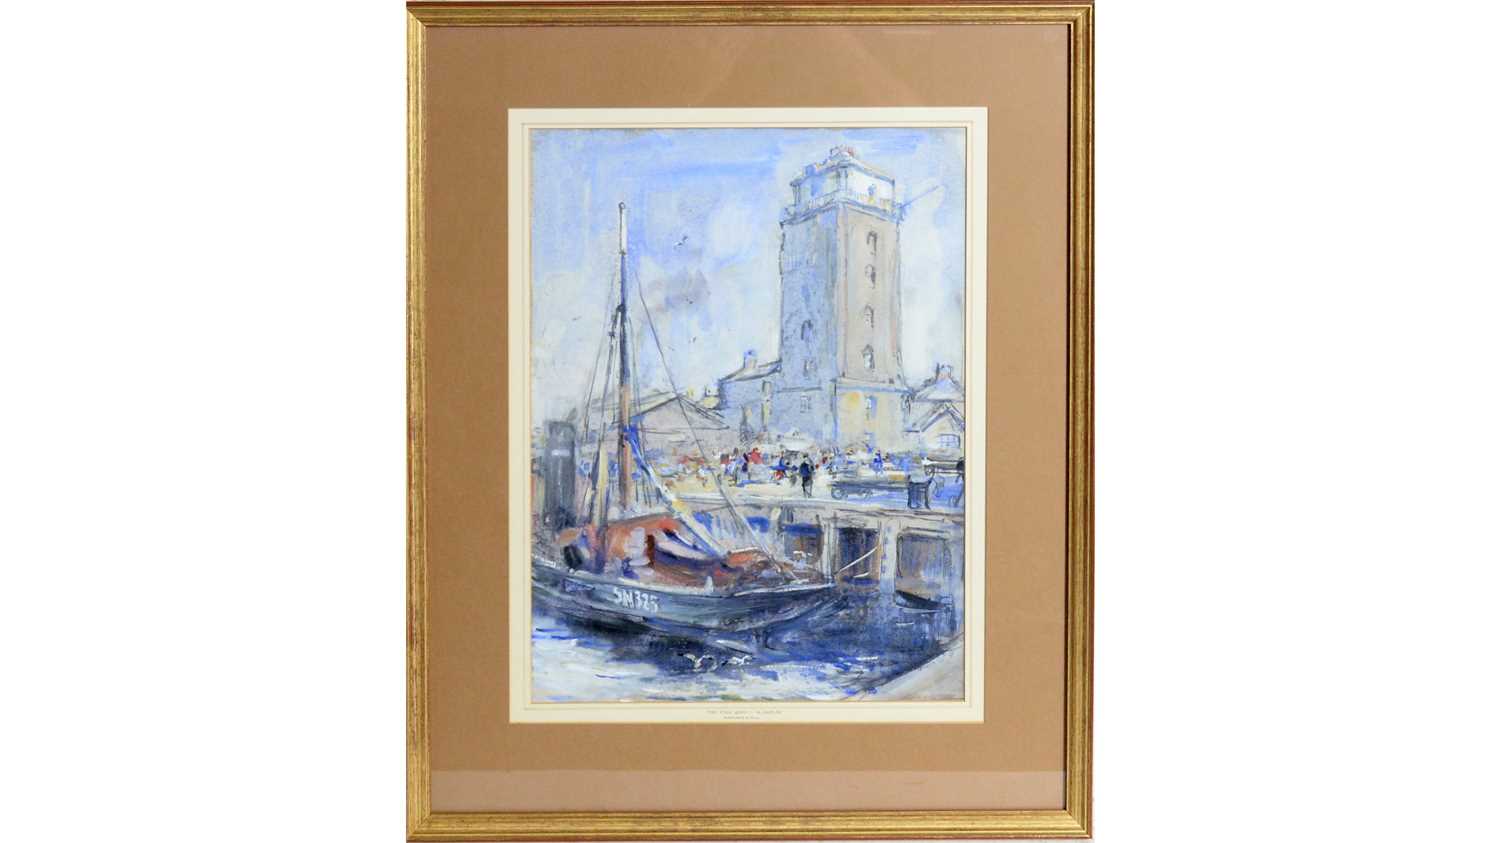 Lot 819 - Rowland Henry Hill - The Fish Quay, North Shields | watercolour